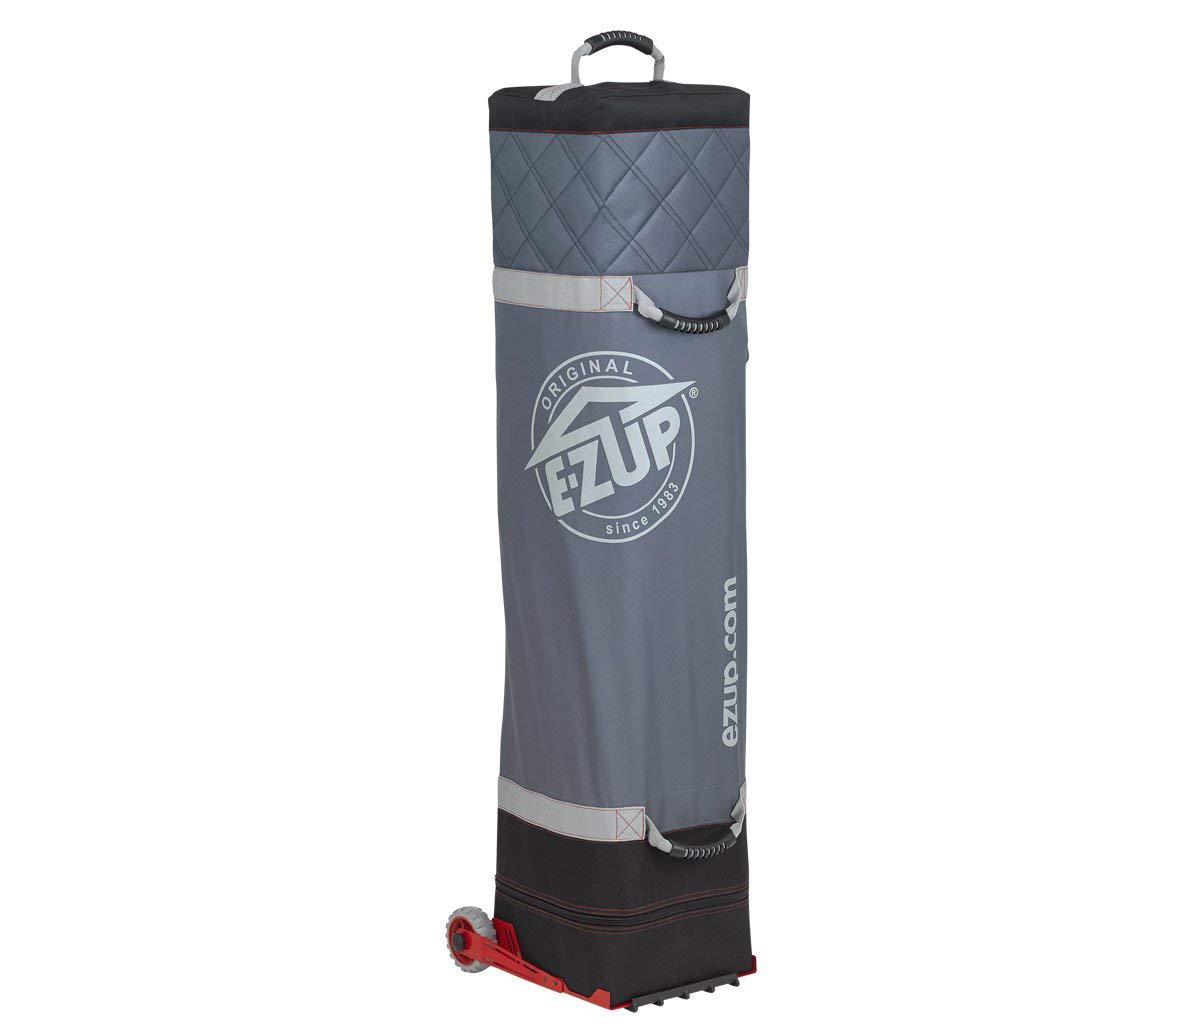 e-z up deluxe wide-trax roller bag, fits 10' x 10' canopy pop-up tent